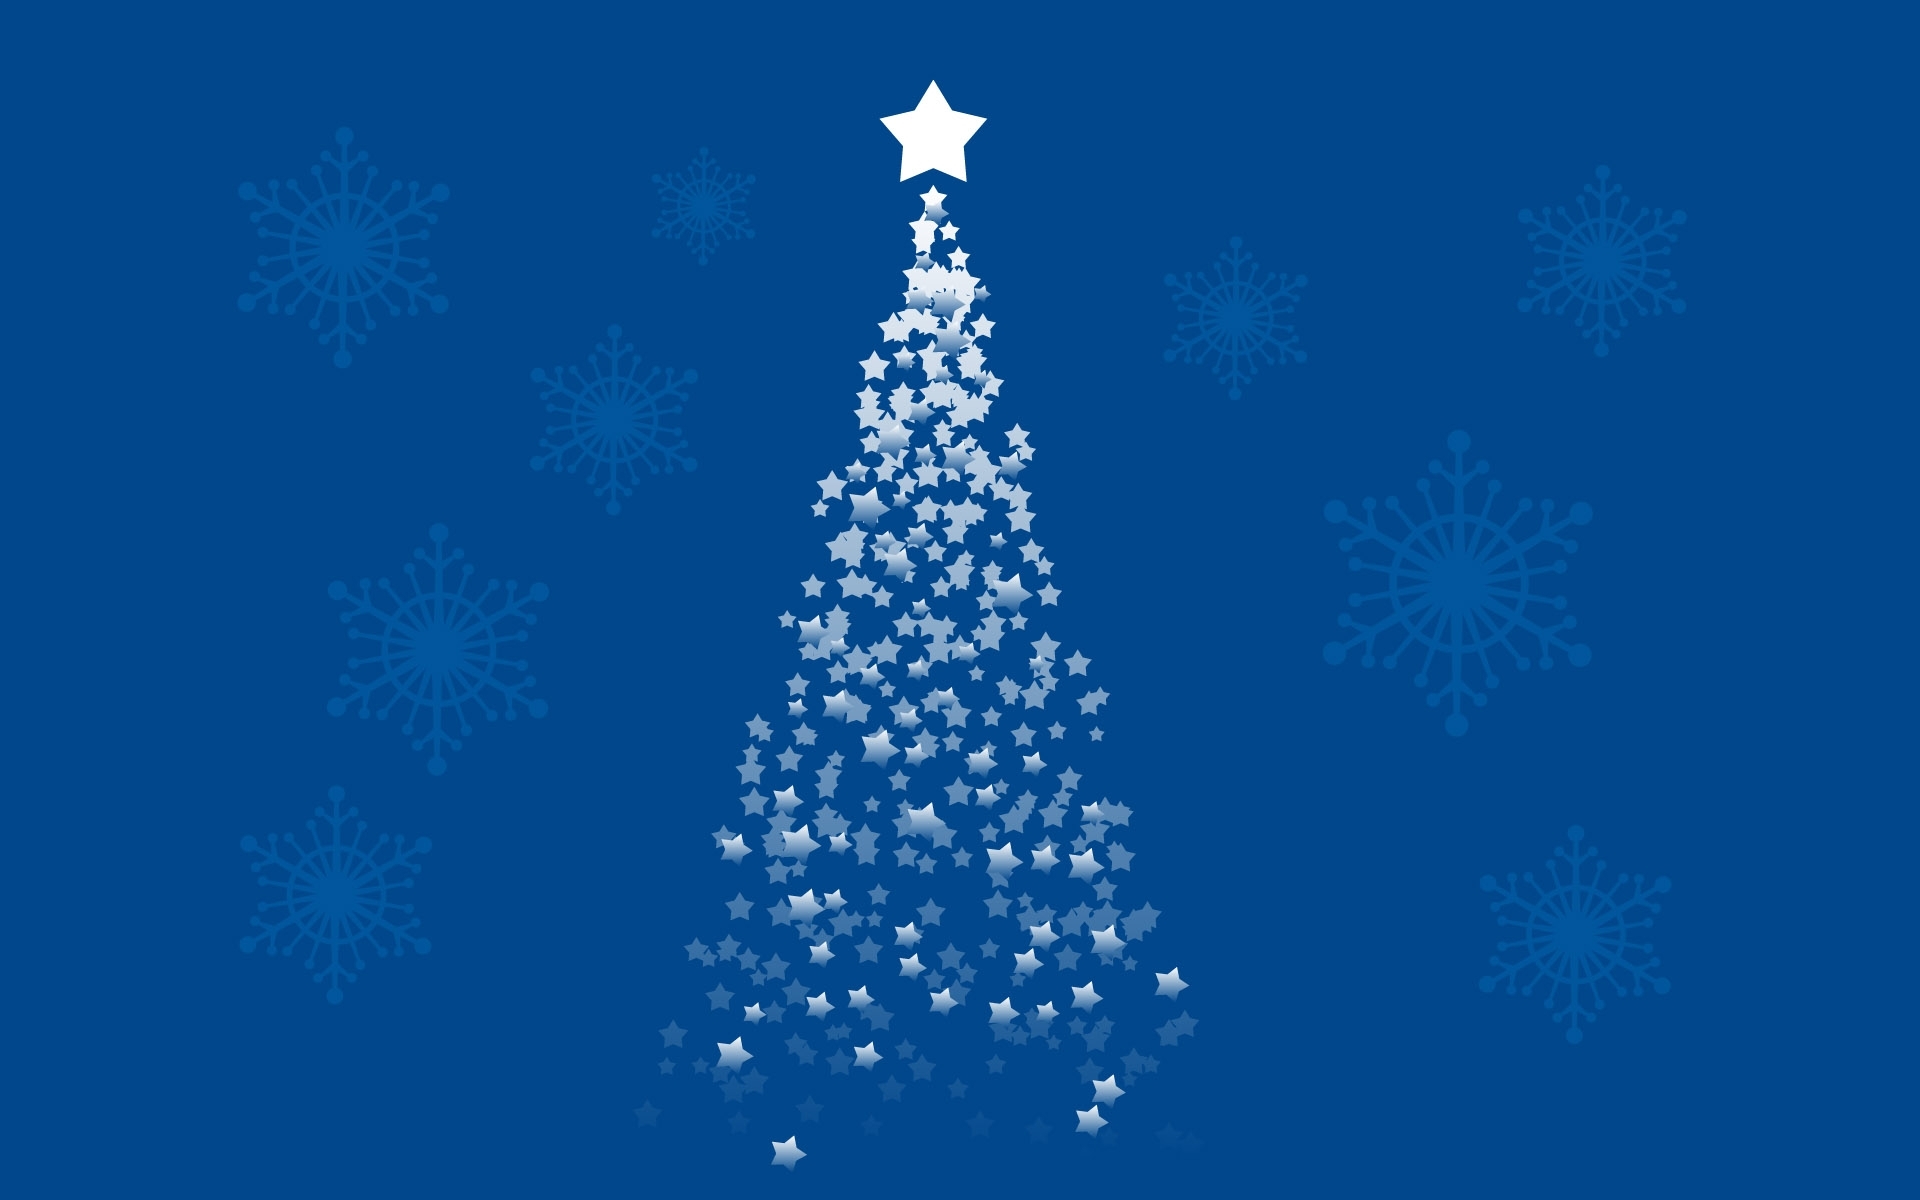 pictures, christmas xmas, holidays, stars, new year, fir trees, blue images